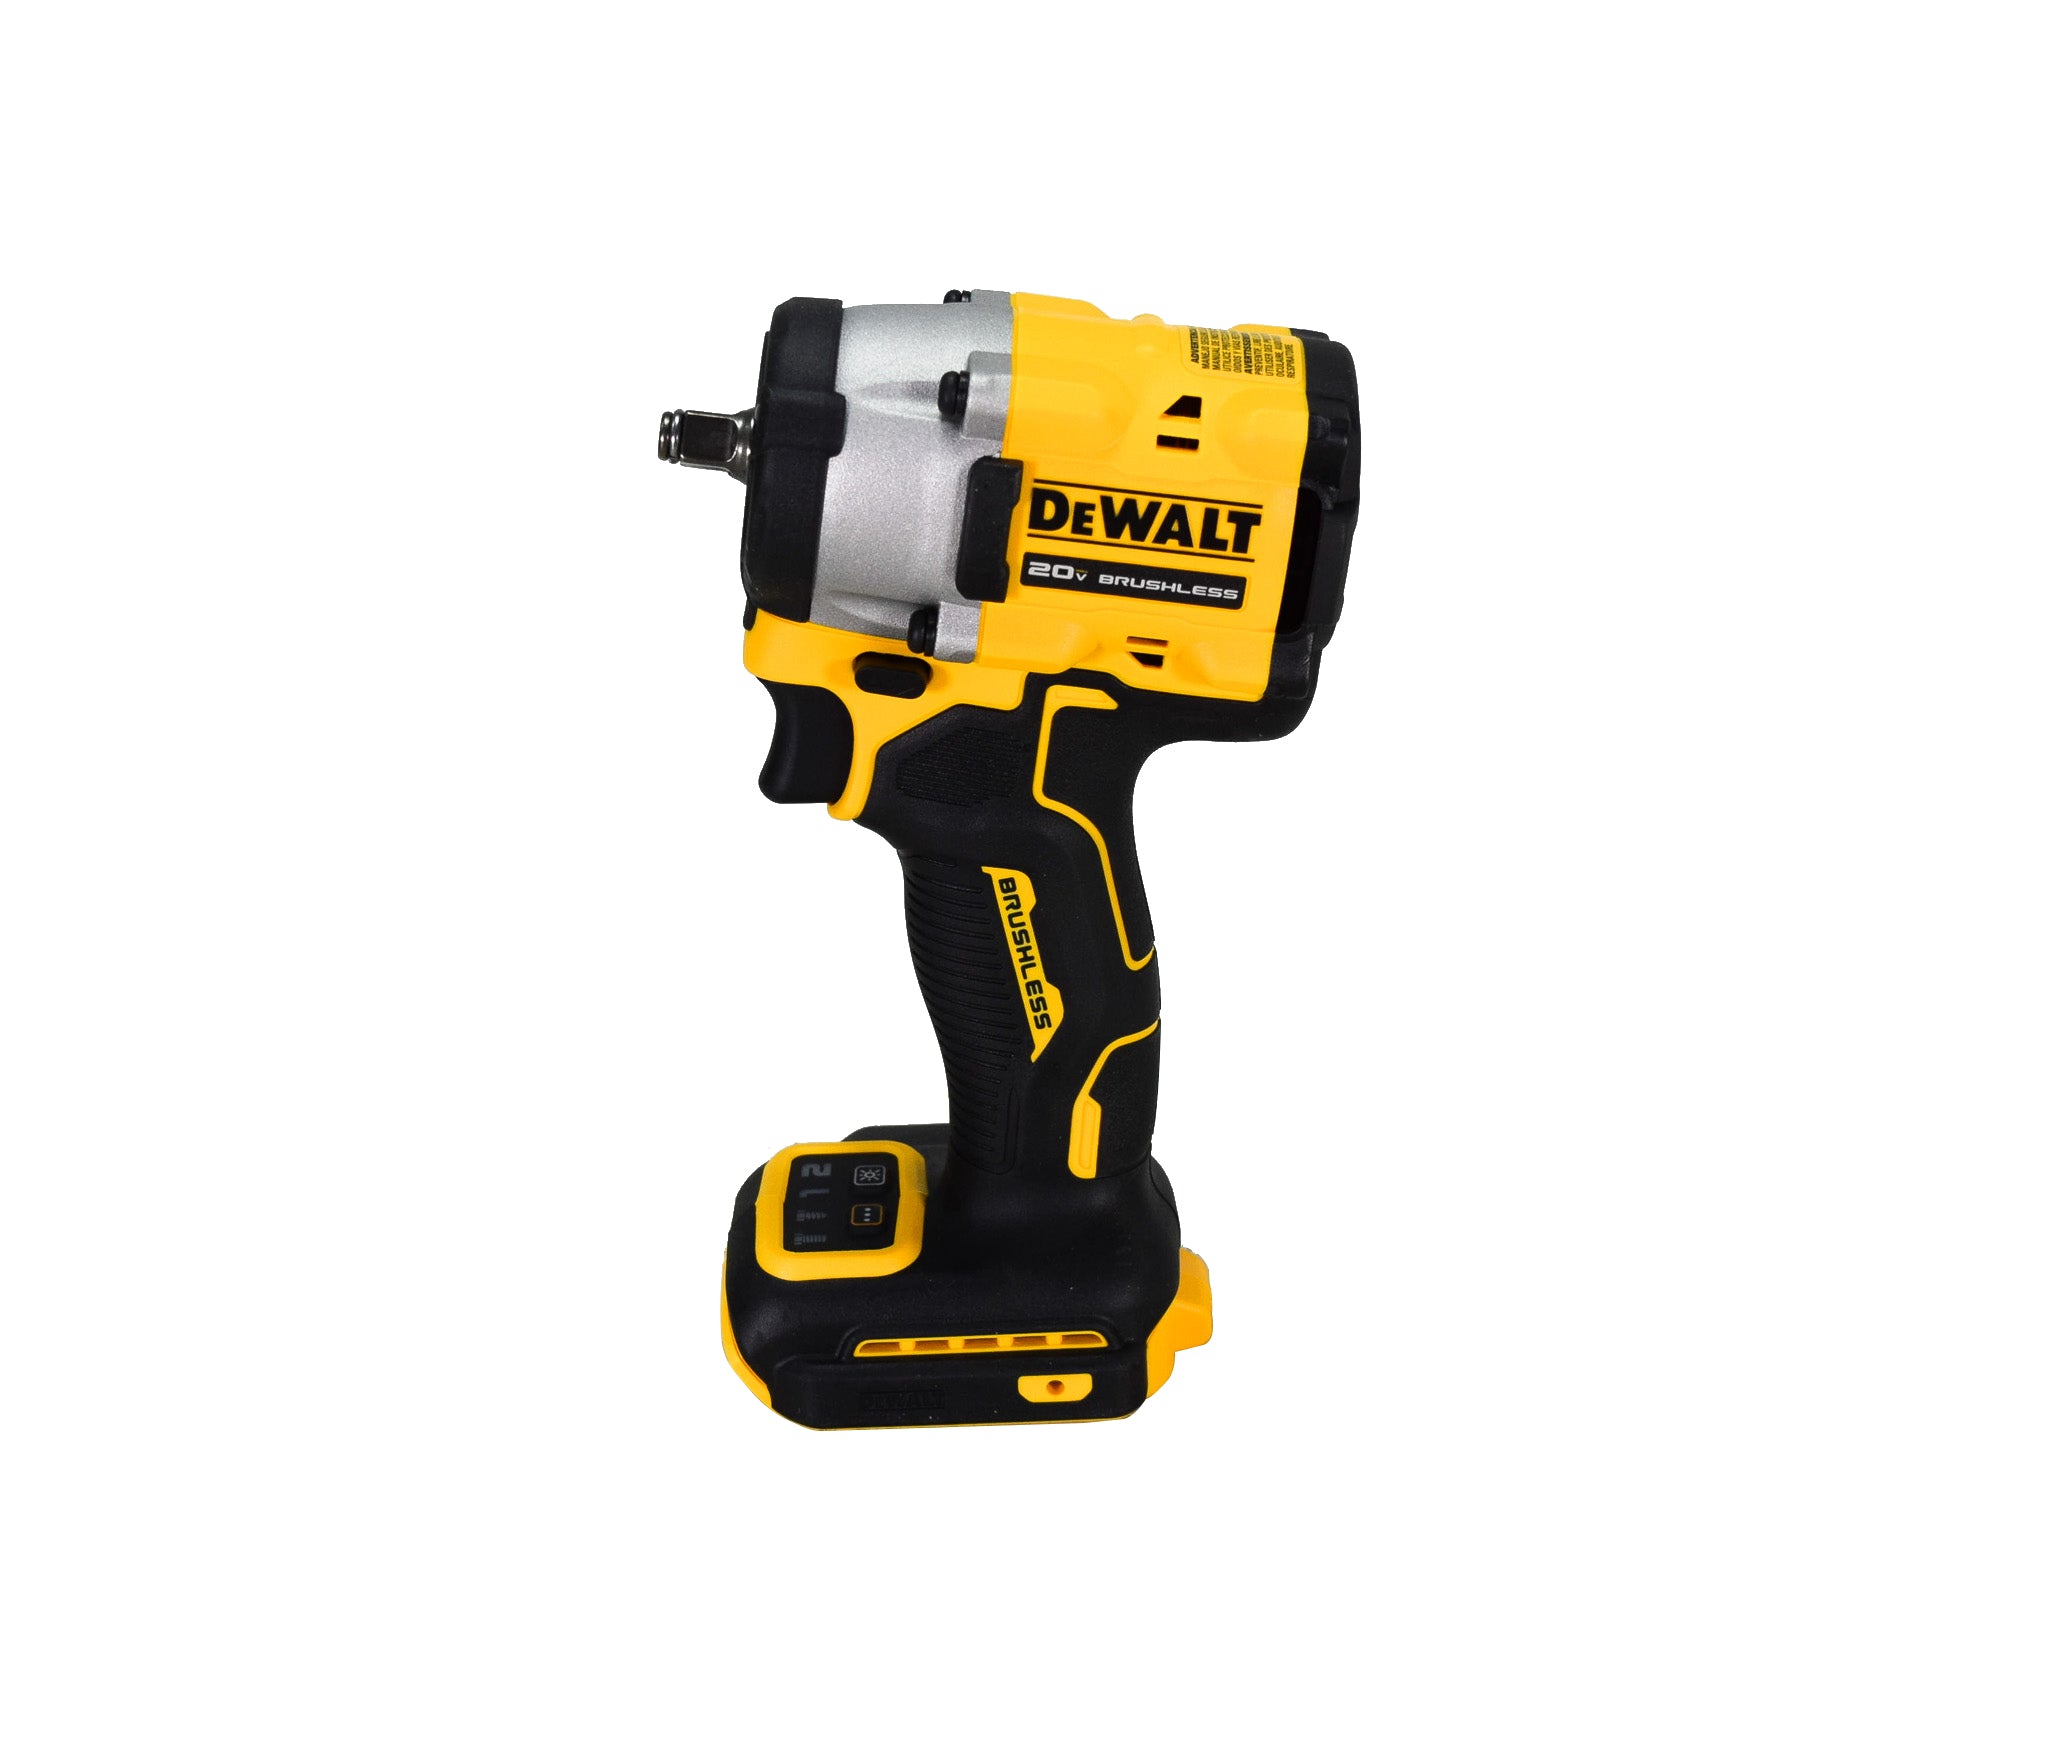 DeWalt DCF923E1 3/8In Compact Impact Wrench Pstack Kit